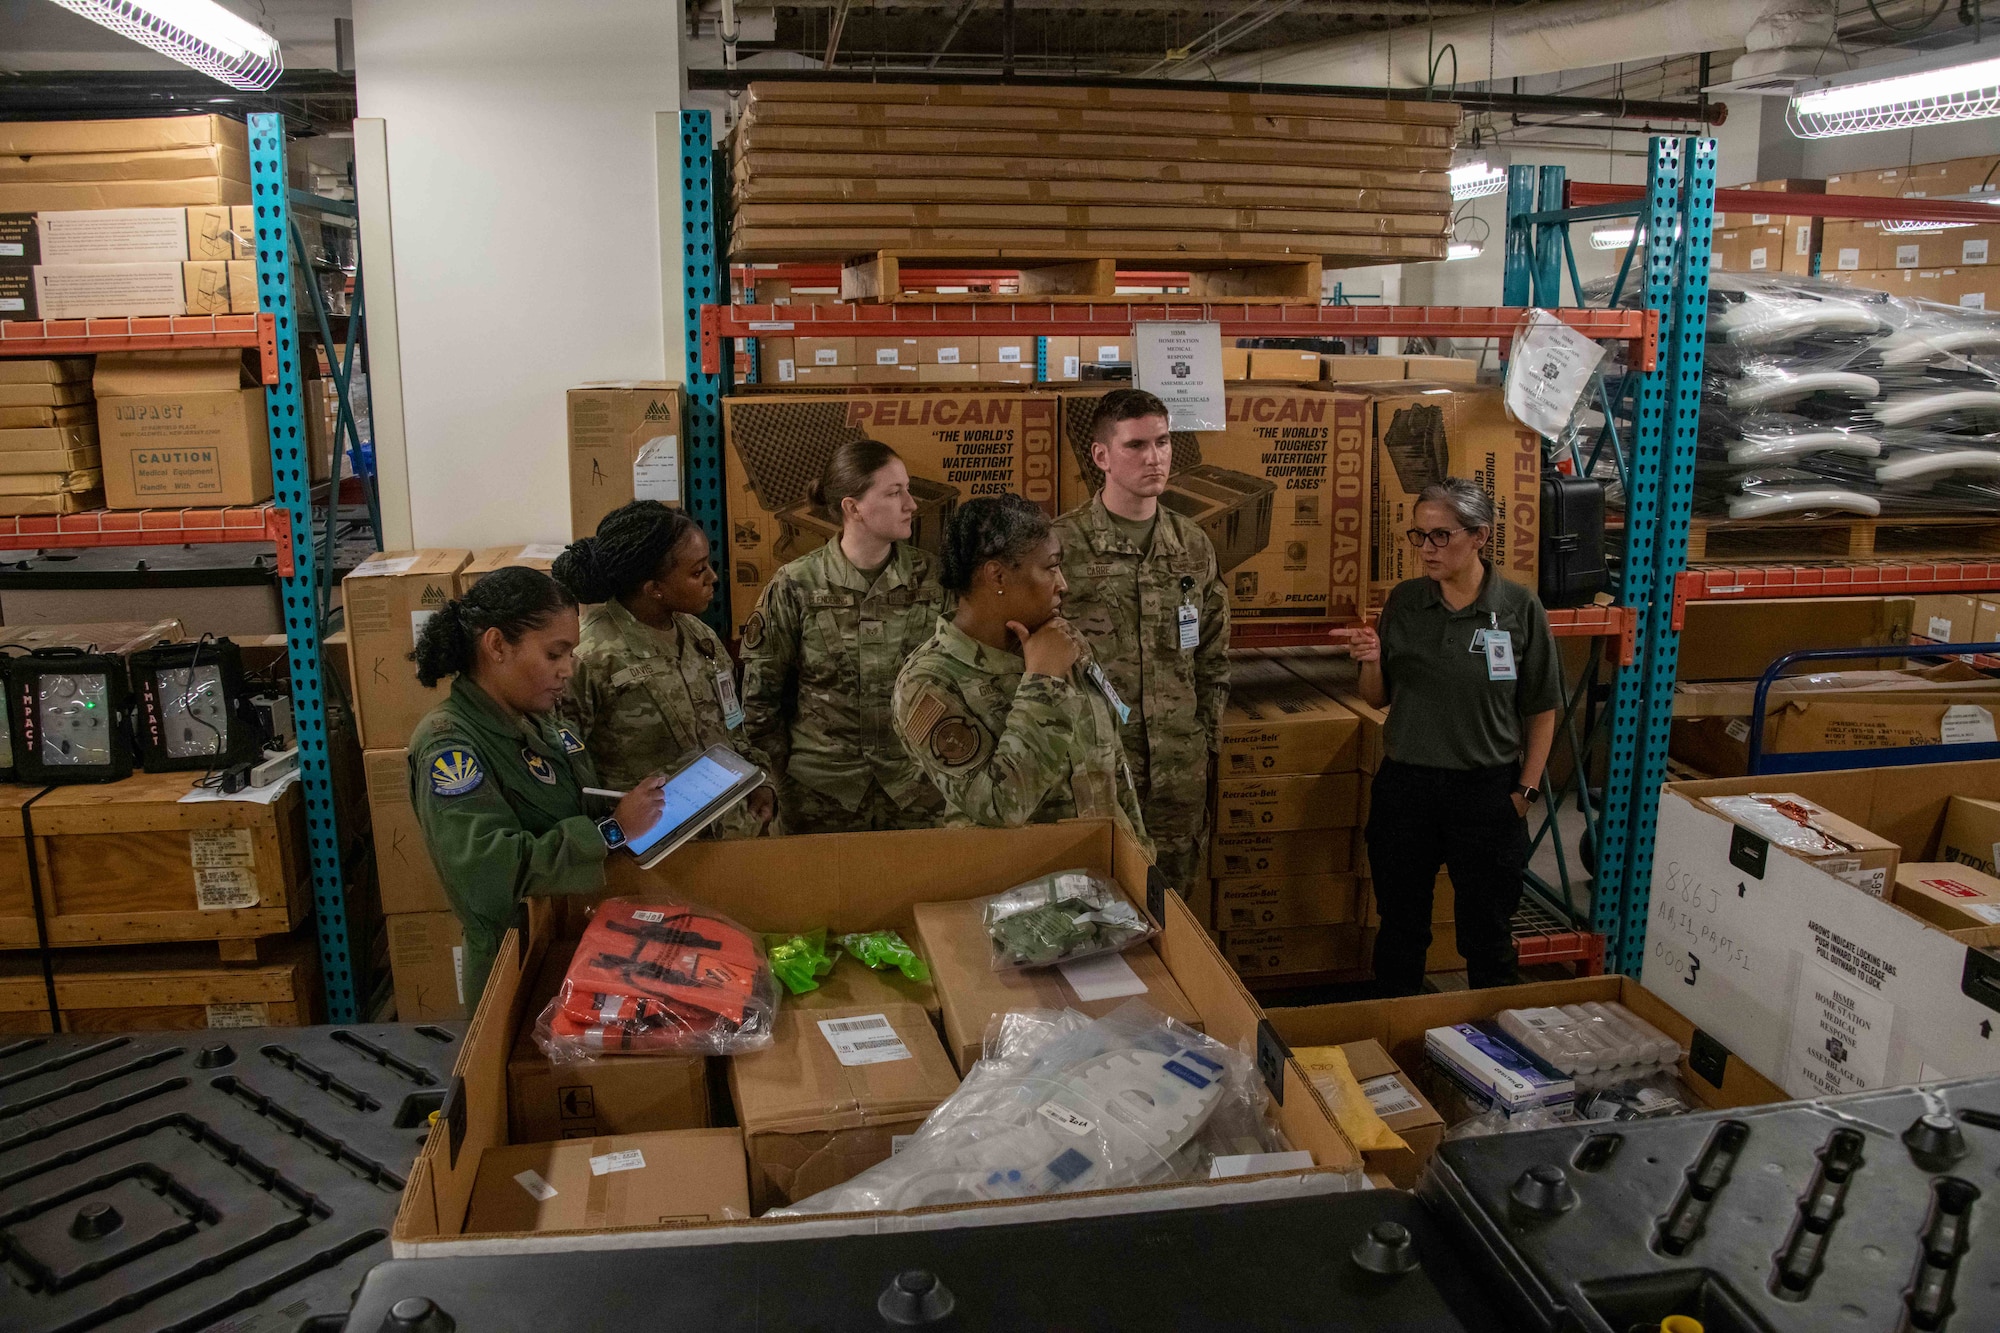 Field response team members are given instructions and validate the operational capability of their Installation Medical All Hazards Response equipment. The training aims to enhance Installation Medical All Hazards Response capability, team integration, and response skills.